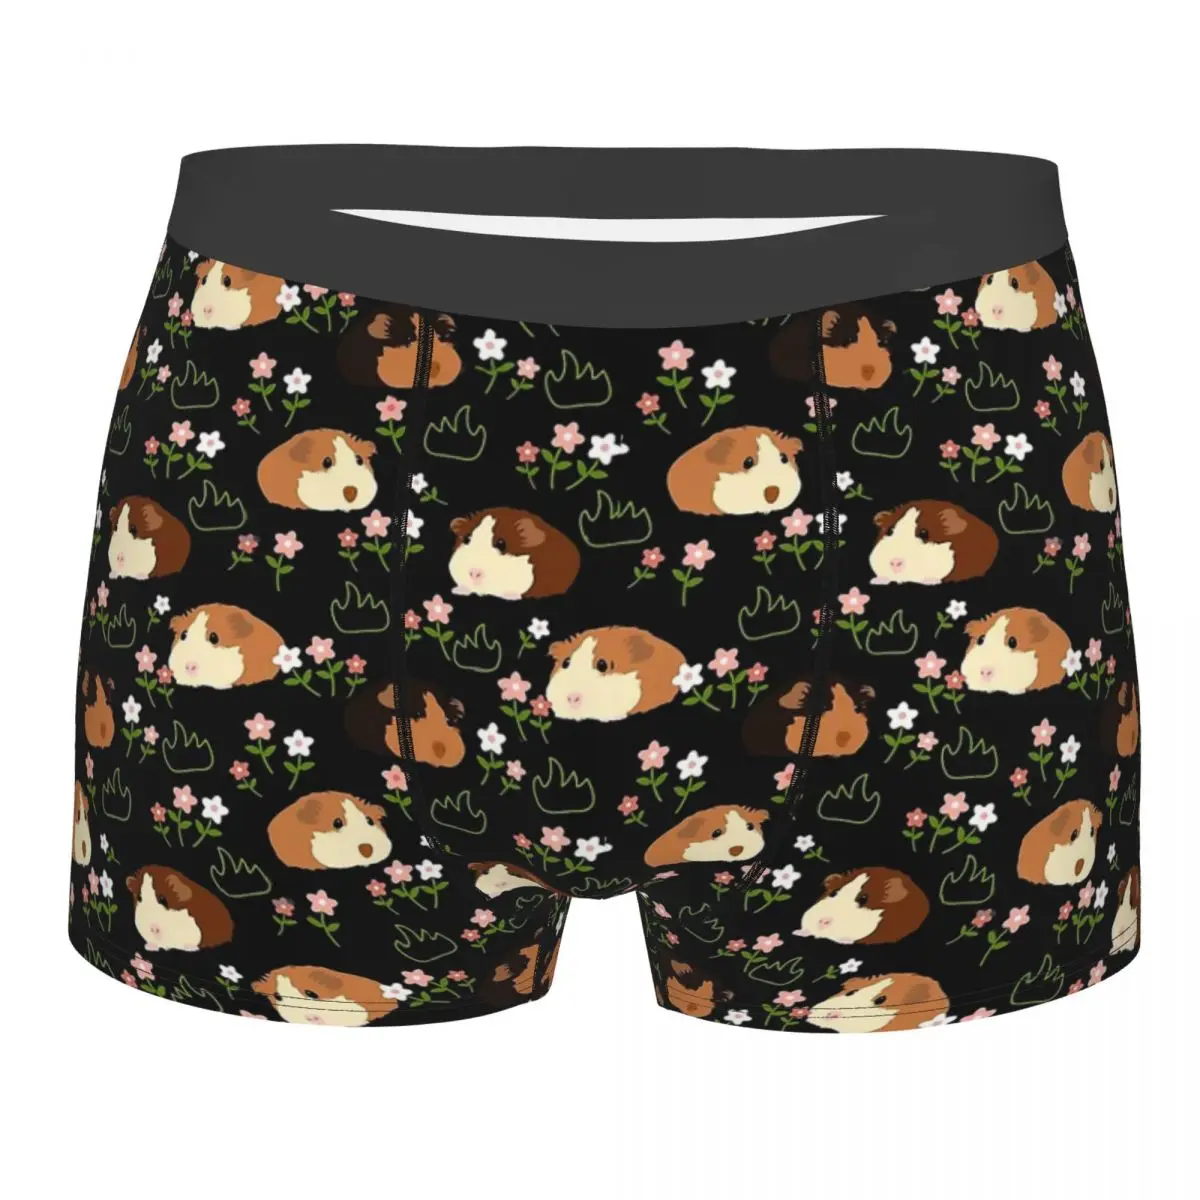 Guinea Pig Cavia Porcellus Animal 4 Man's Boxer Briefs Underwear Highly Breathable High Quality Gift Idea